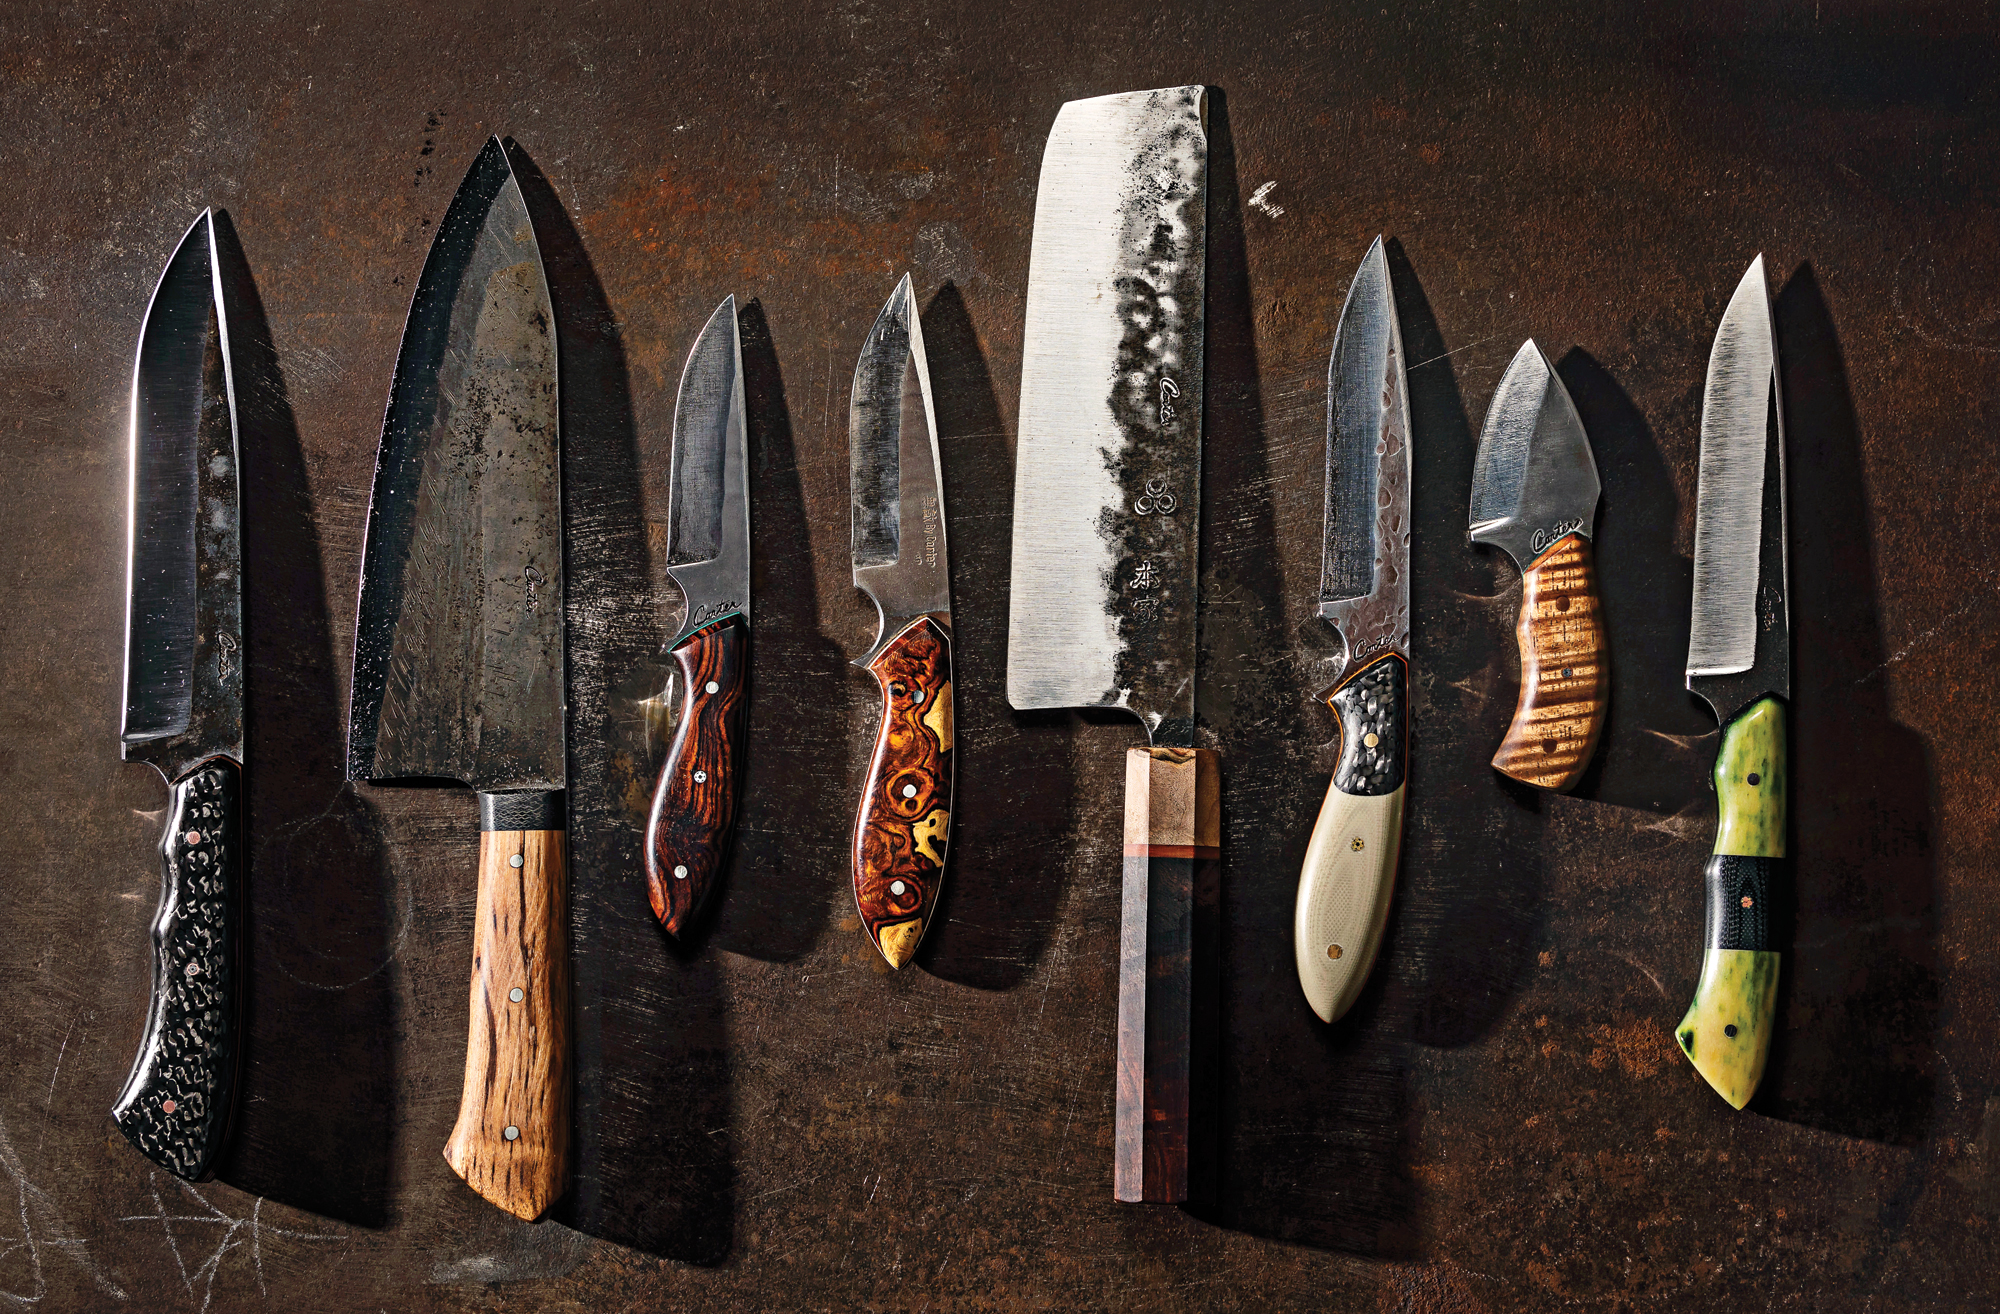 Blade City, USA: Meet the Insanely Talented Knife Makers of Portland